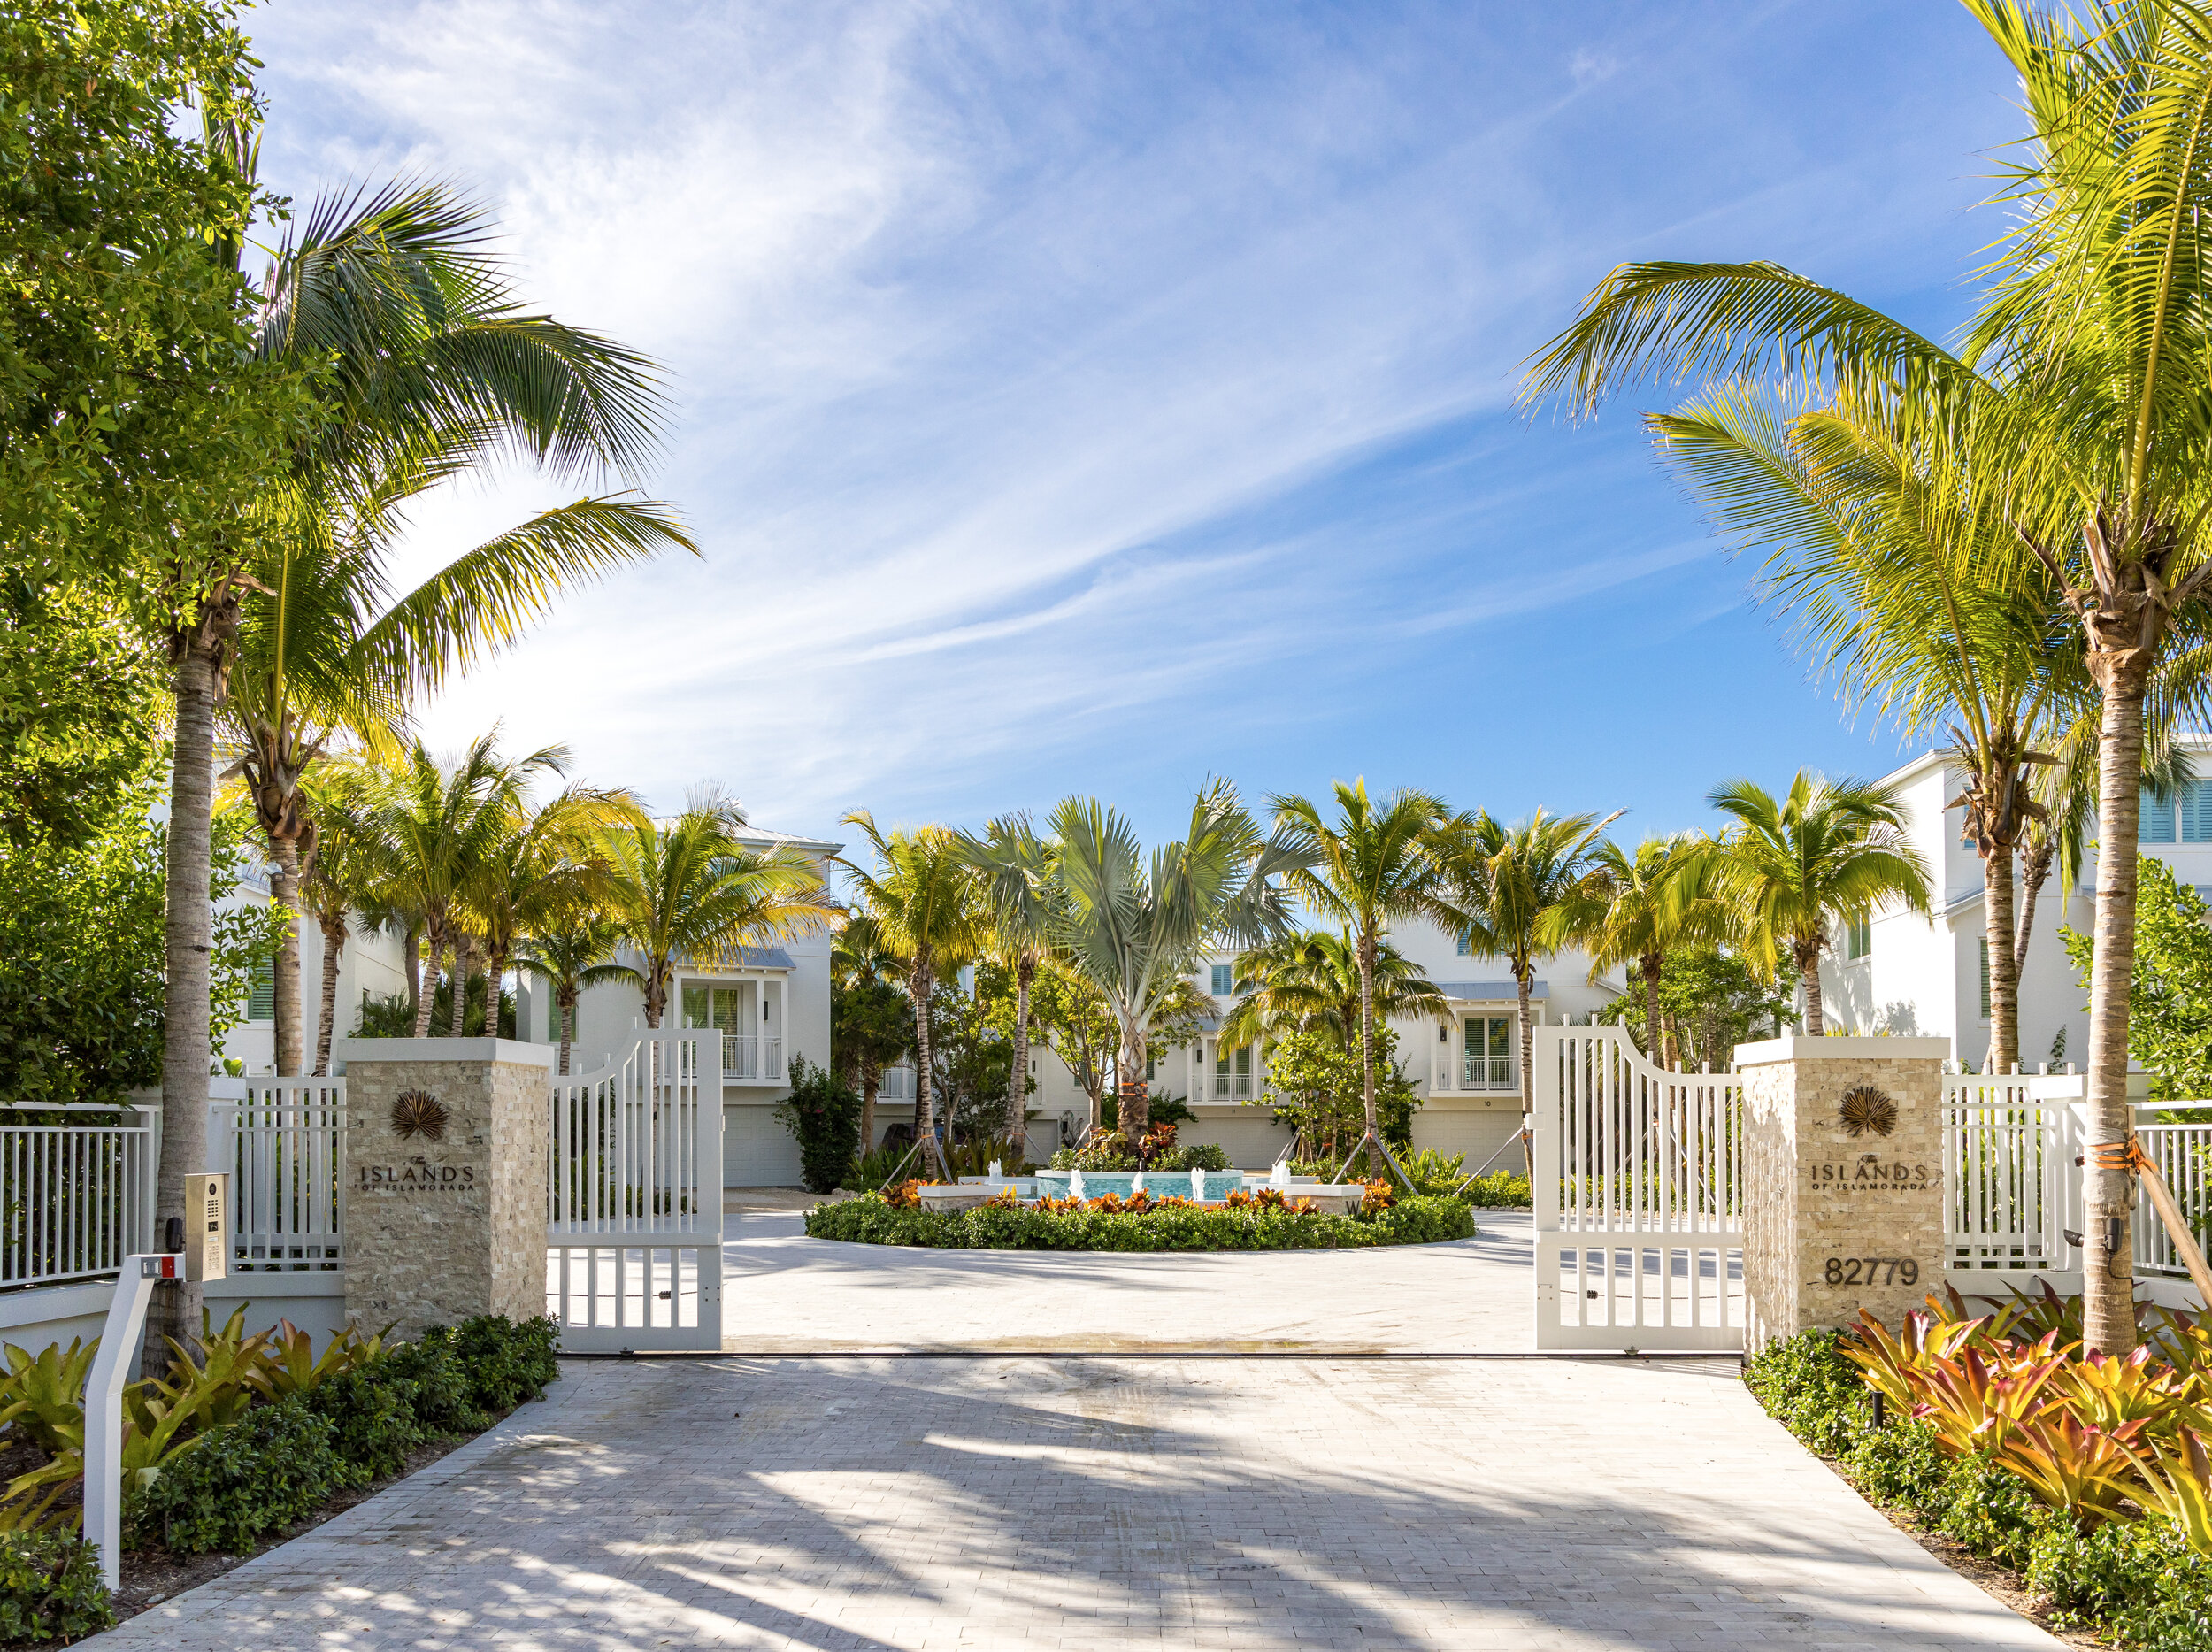  The Islands of Islamorada’s entrance gates, surrounded by palm trees. 